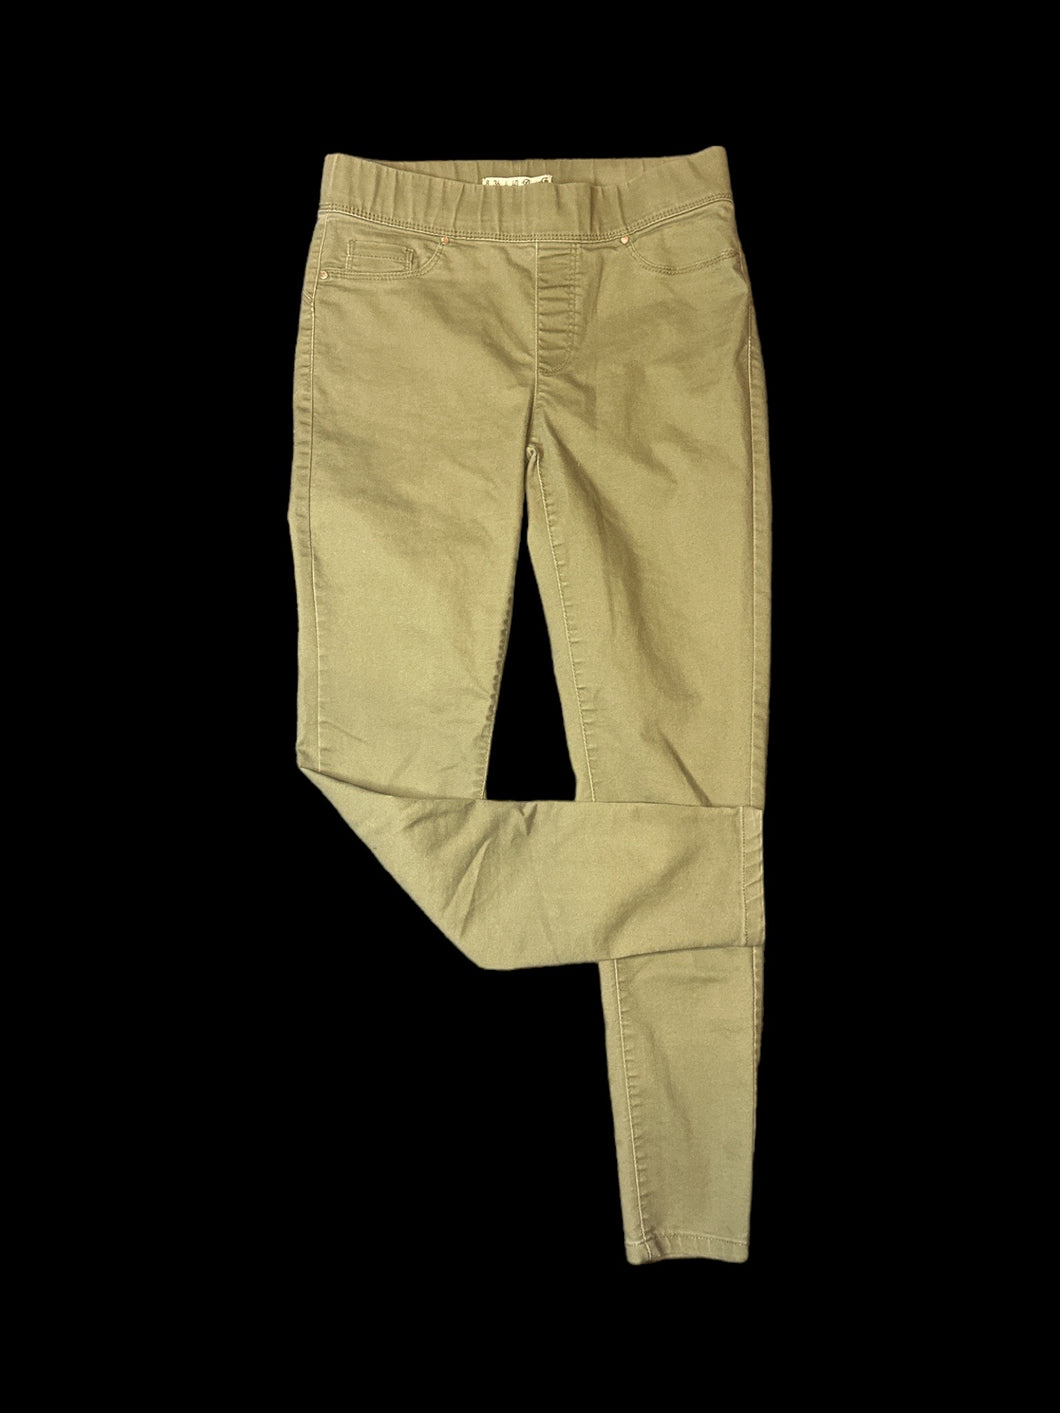 XXS Olive green pants w/ elastic waist, faux front pockets, & real back pockets